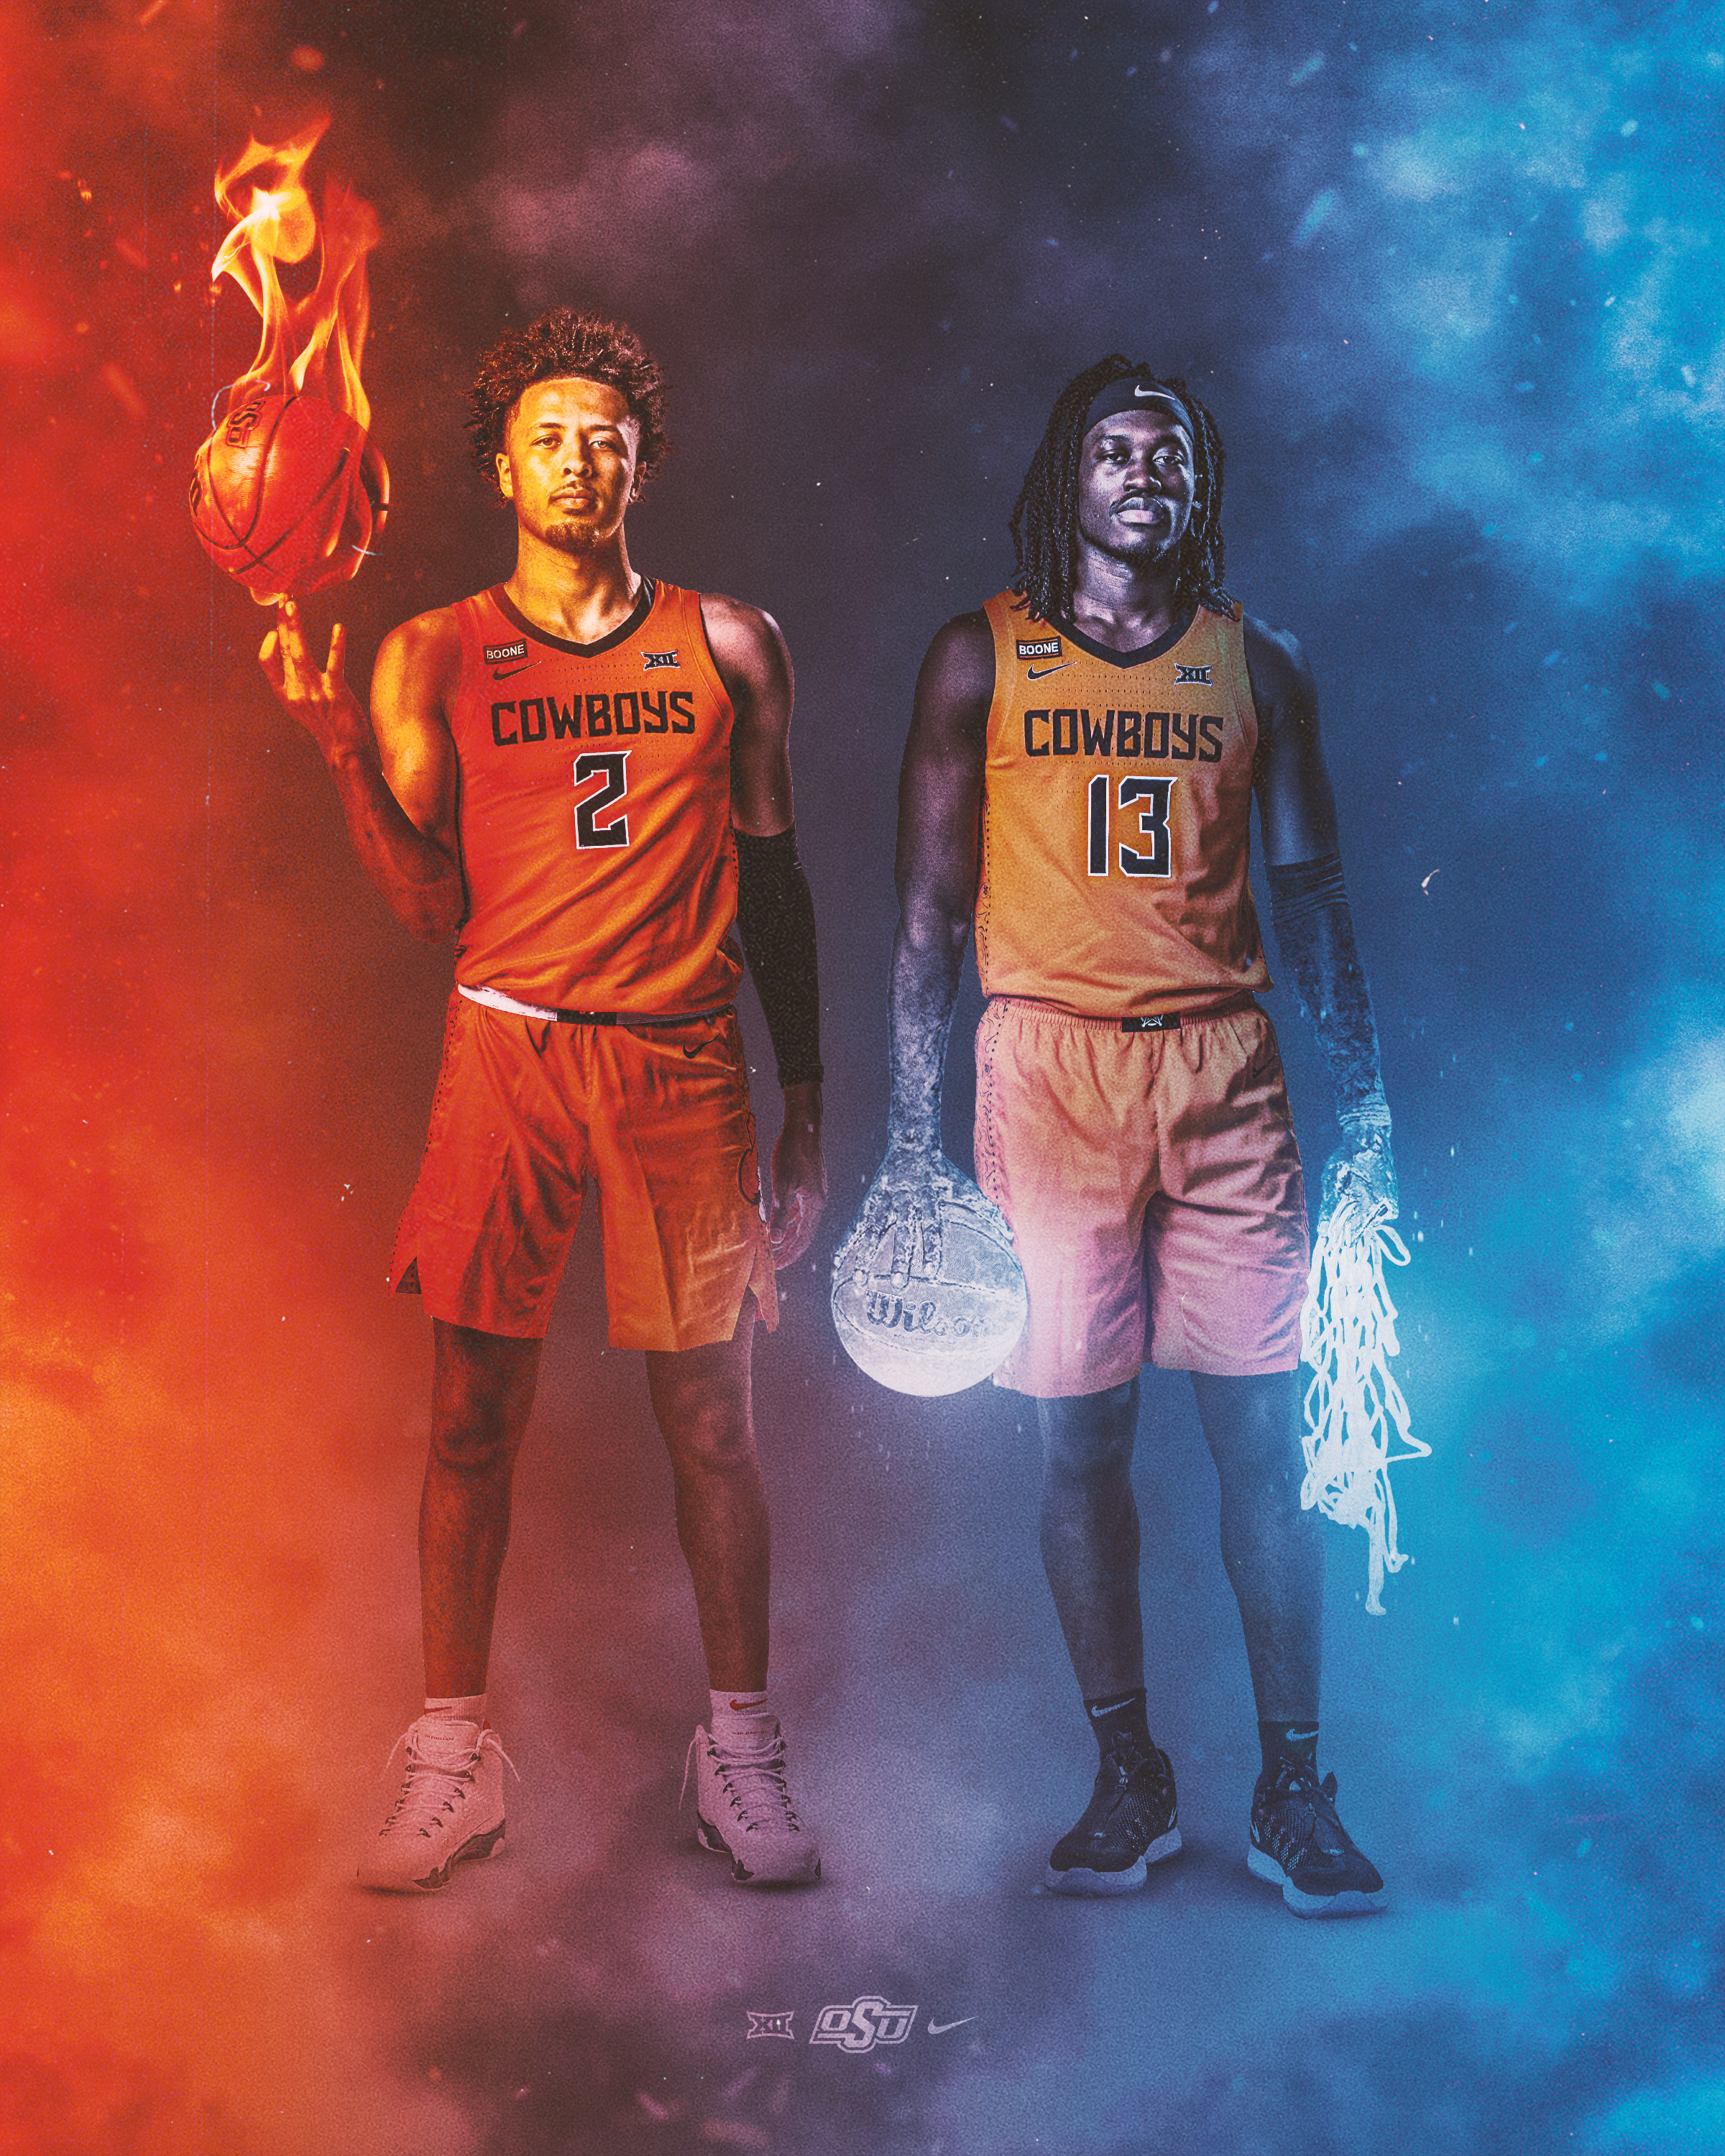 OSU Cowboy Basketball looking for the wallpaper version of Fire & Ice? #NewEra #GoPokes